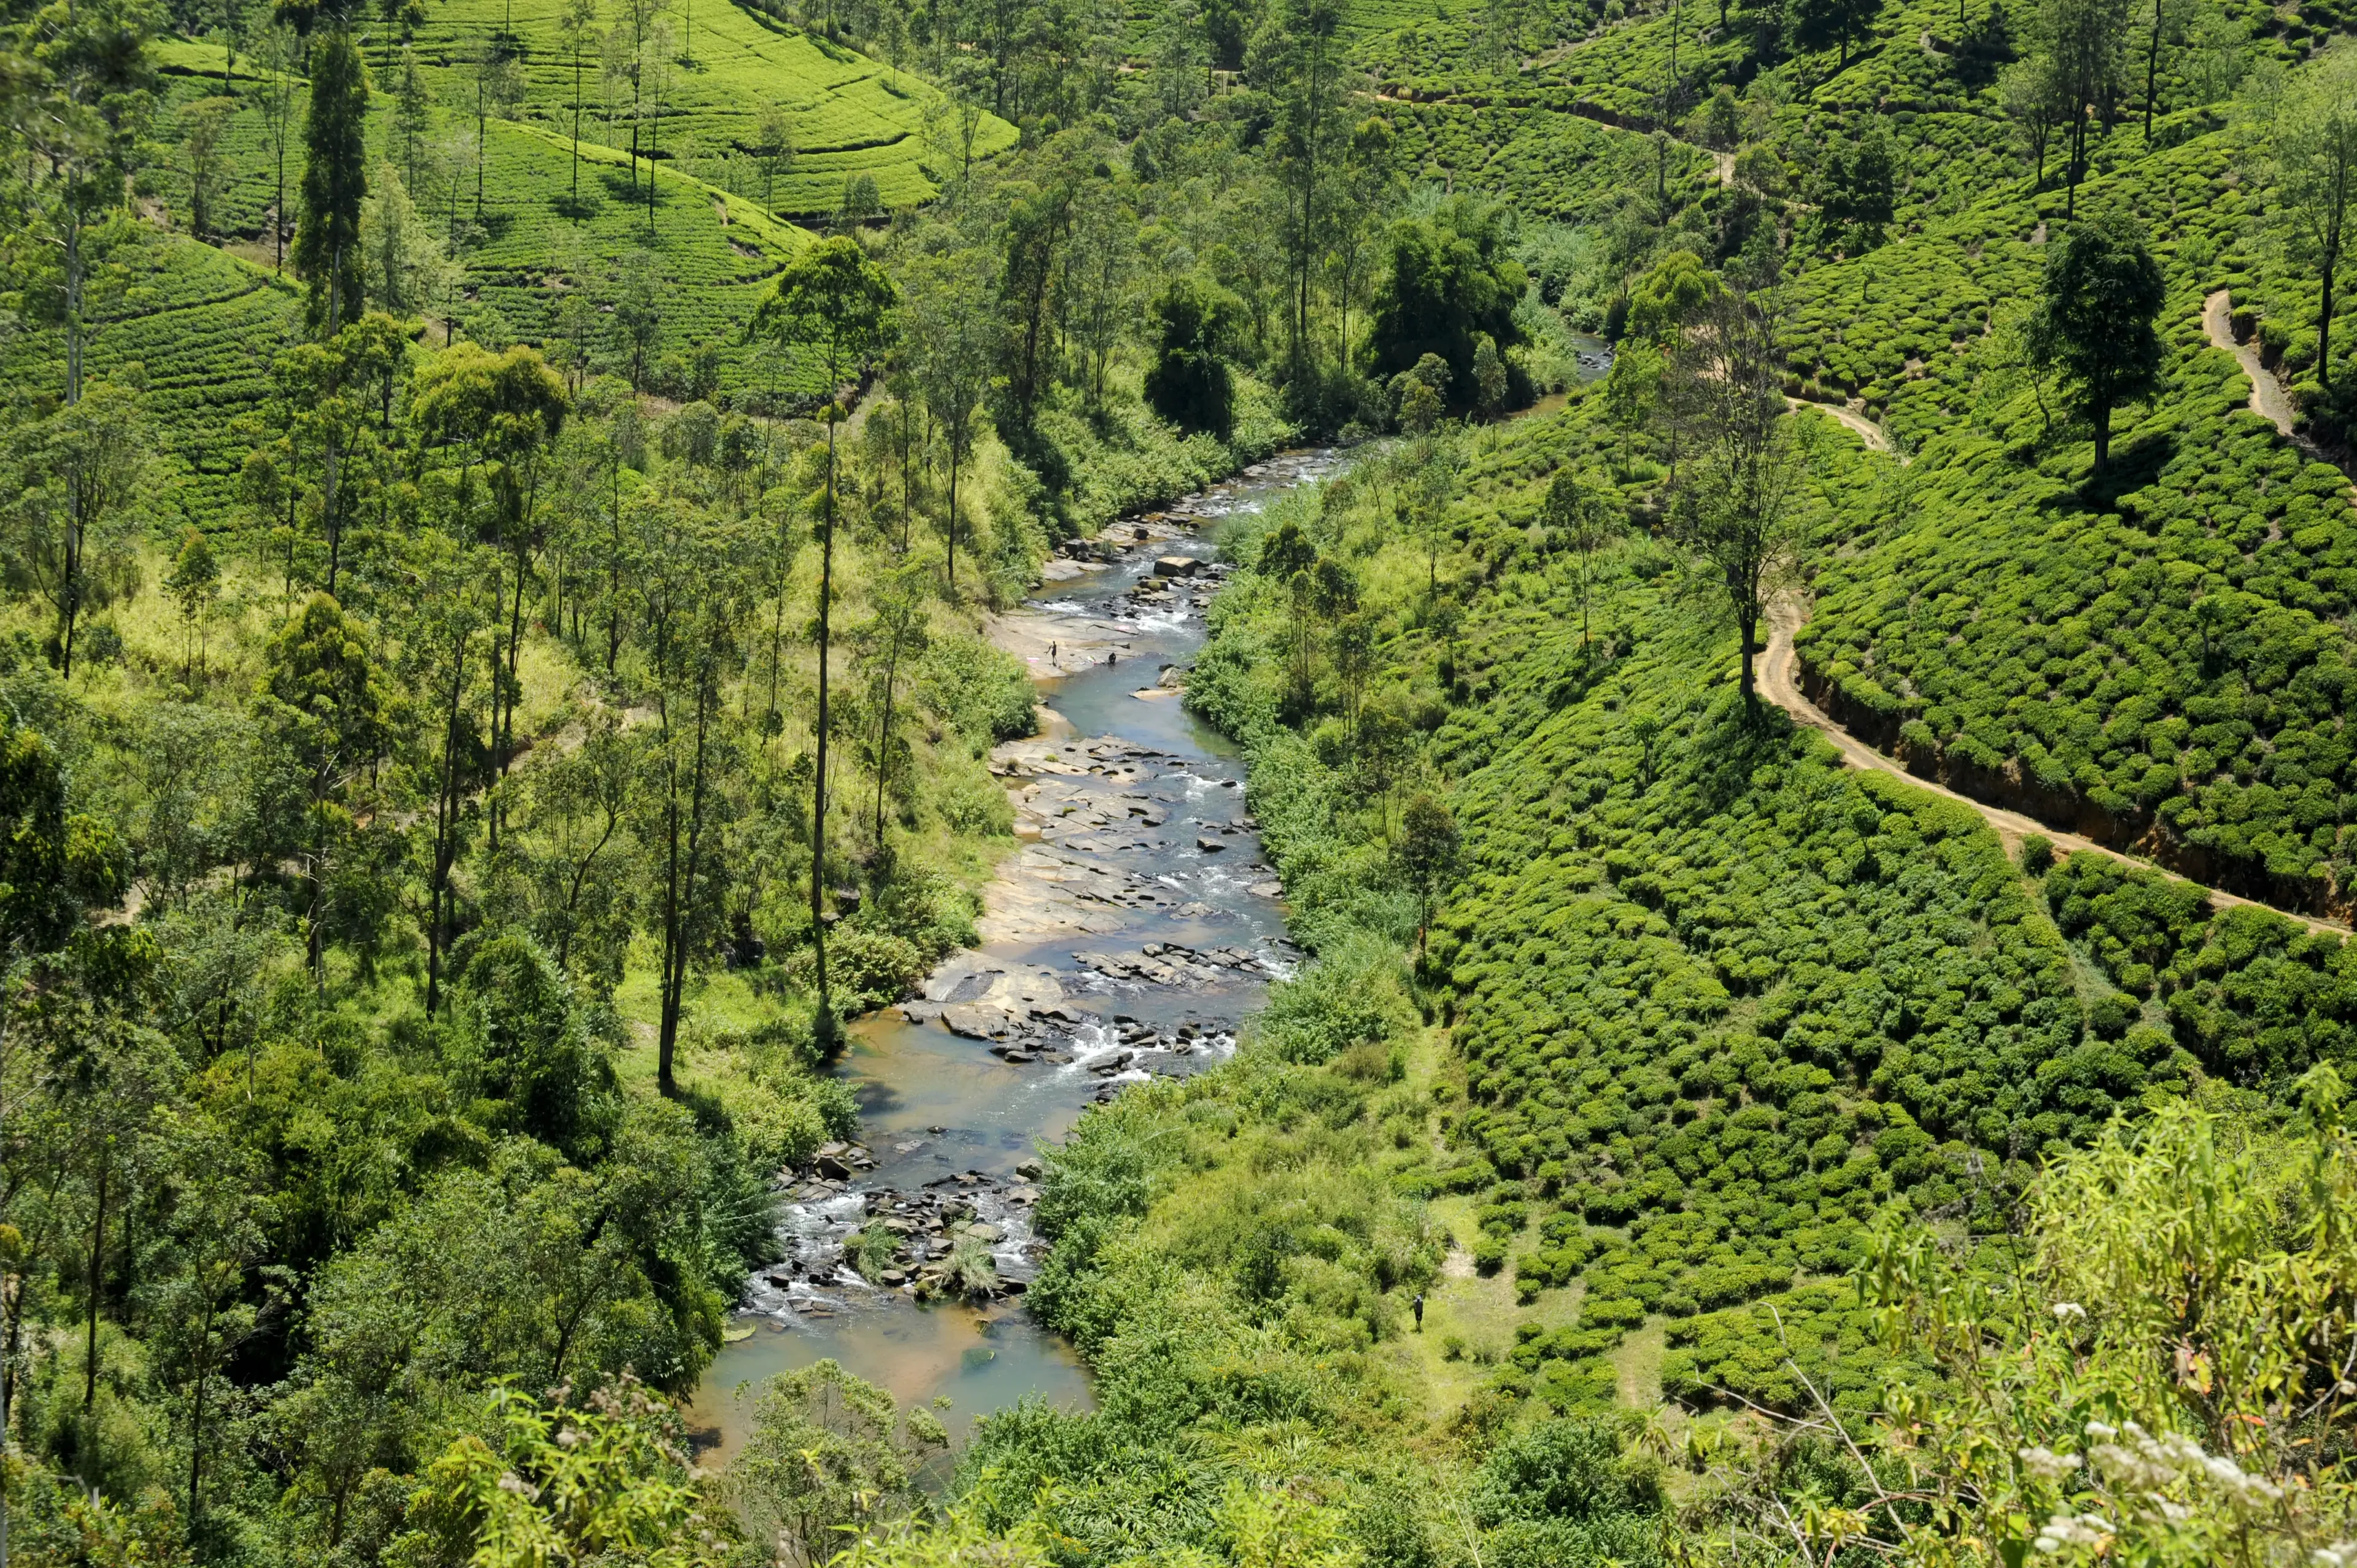 View of the hills and river at the Radella tea estate